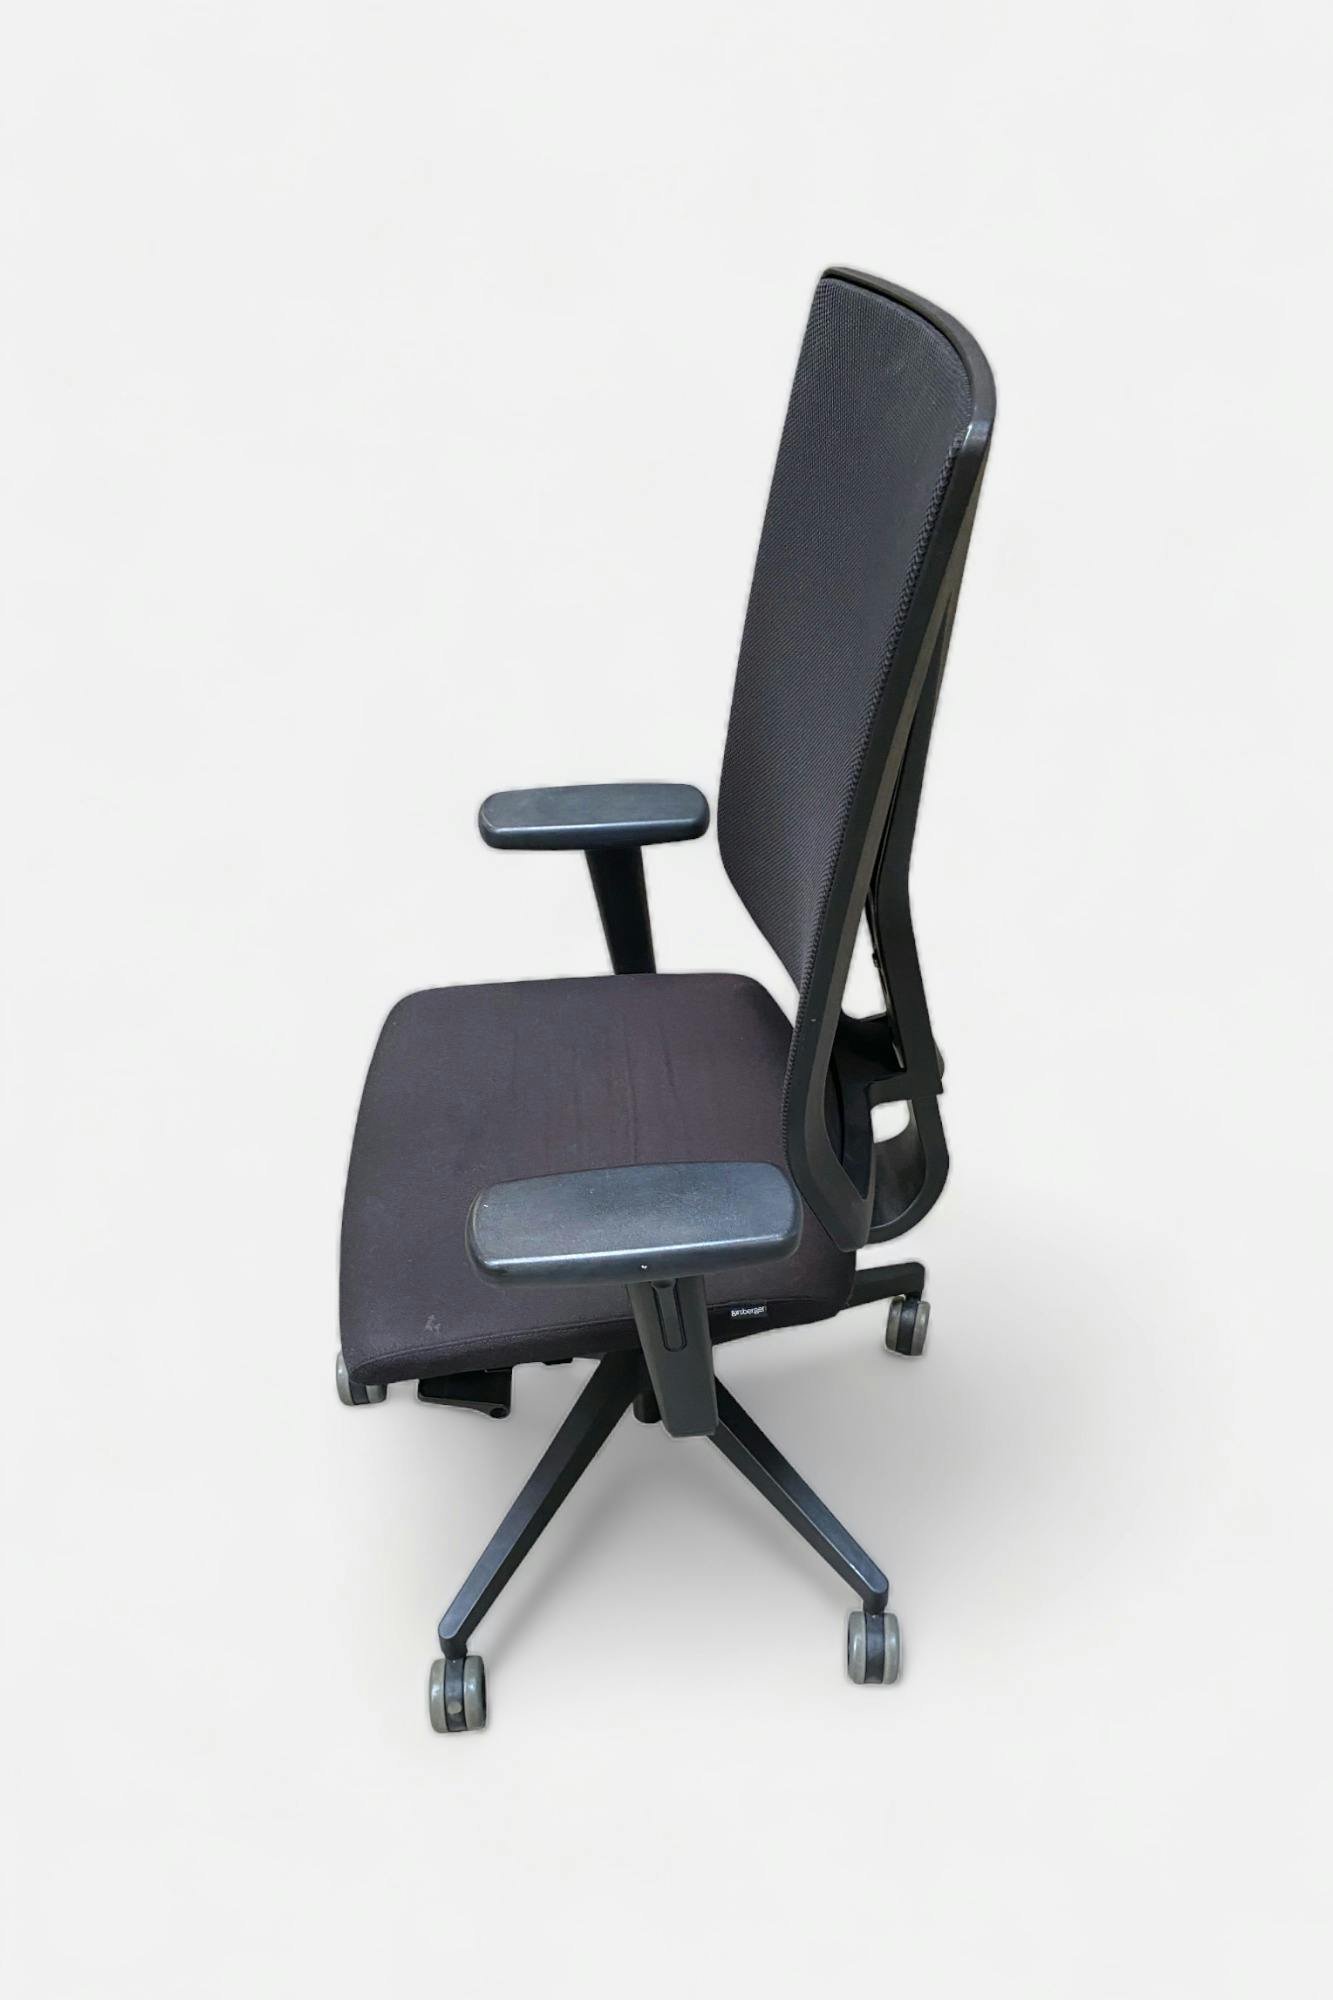 Girsberger black office chair - Second hand quality "Office chairs" - Relieve Furniture